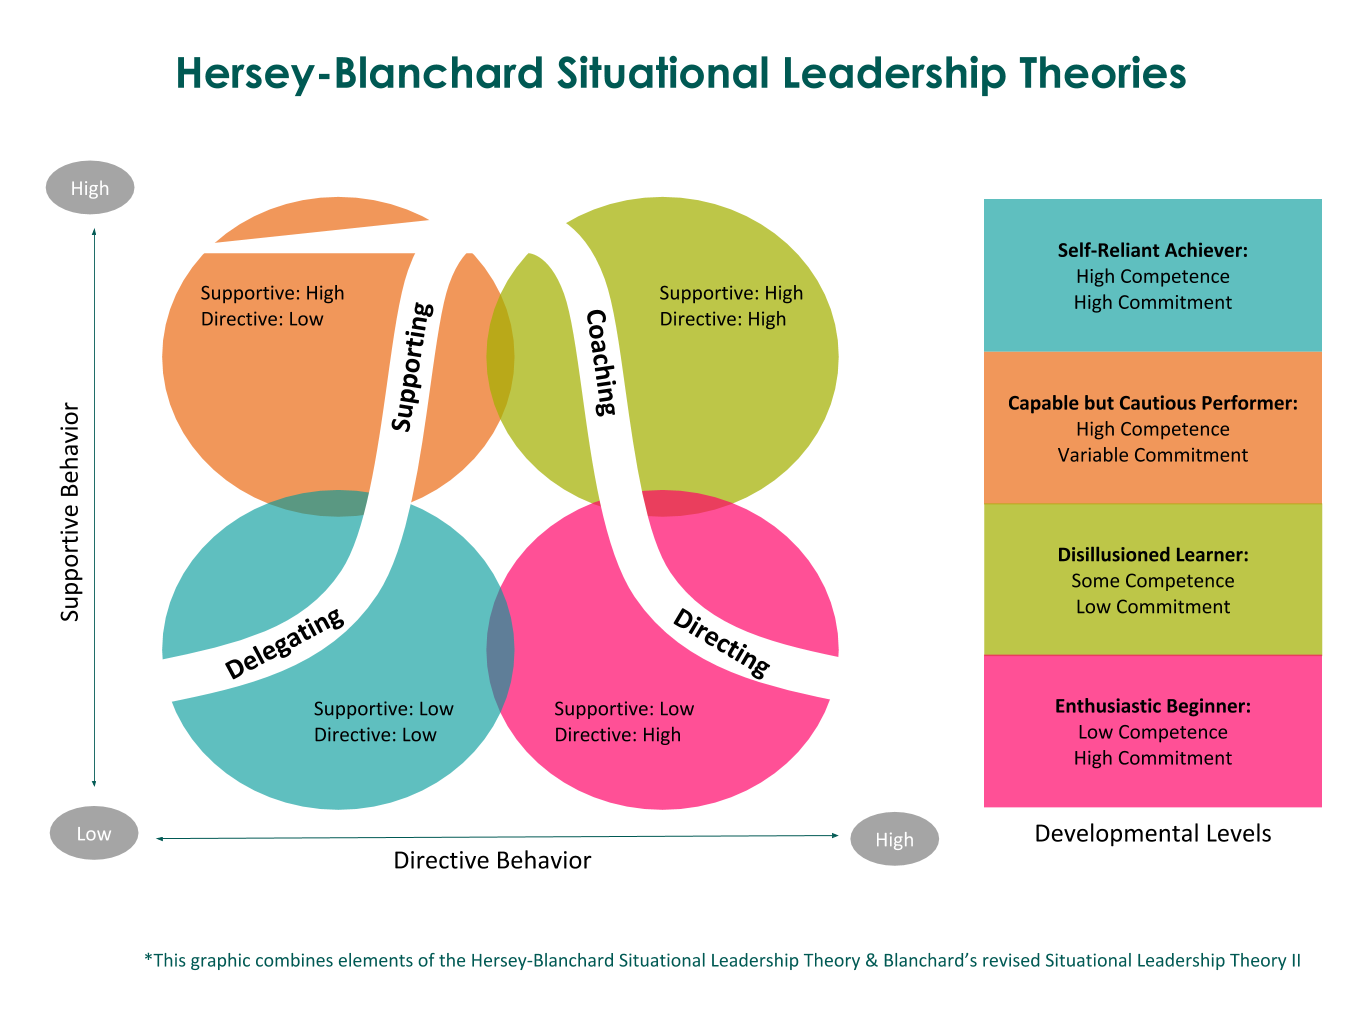 Situational Leadership theories flow chart categorizing low and high supportive vs low and high directive behaviour